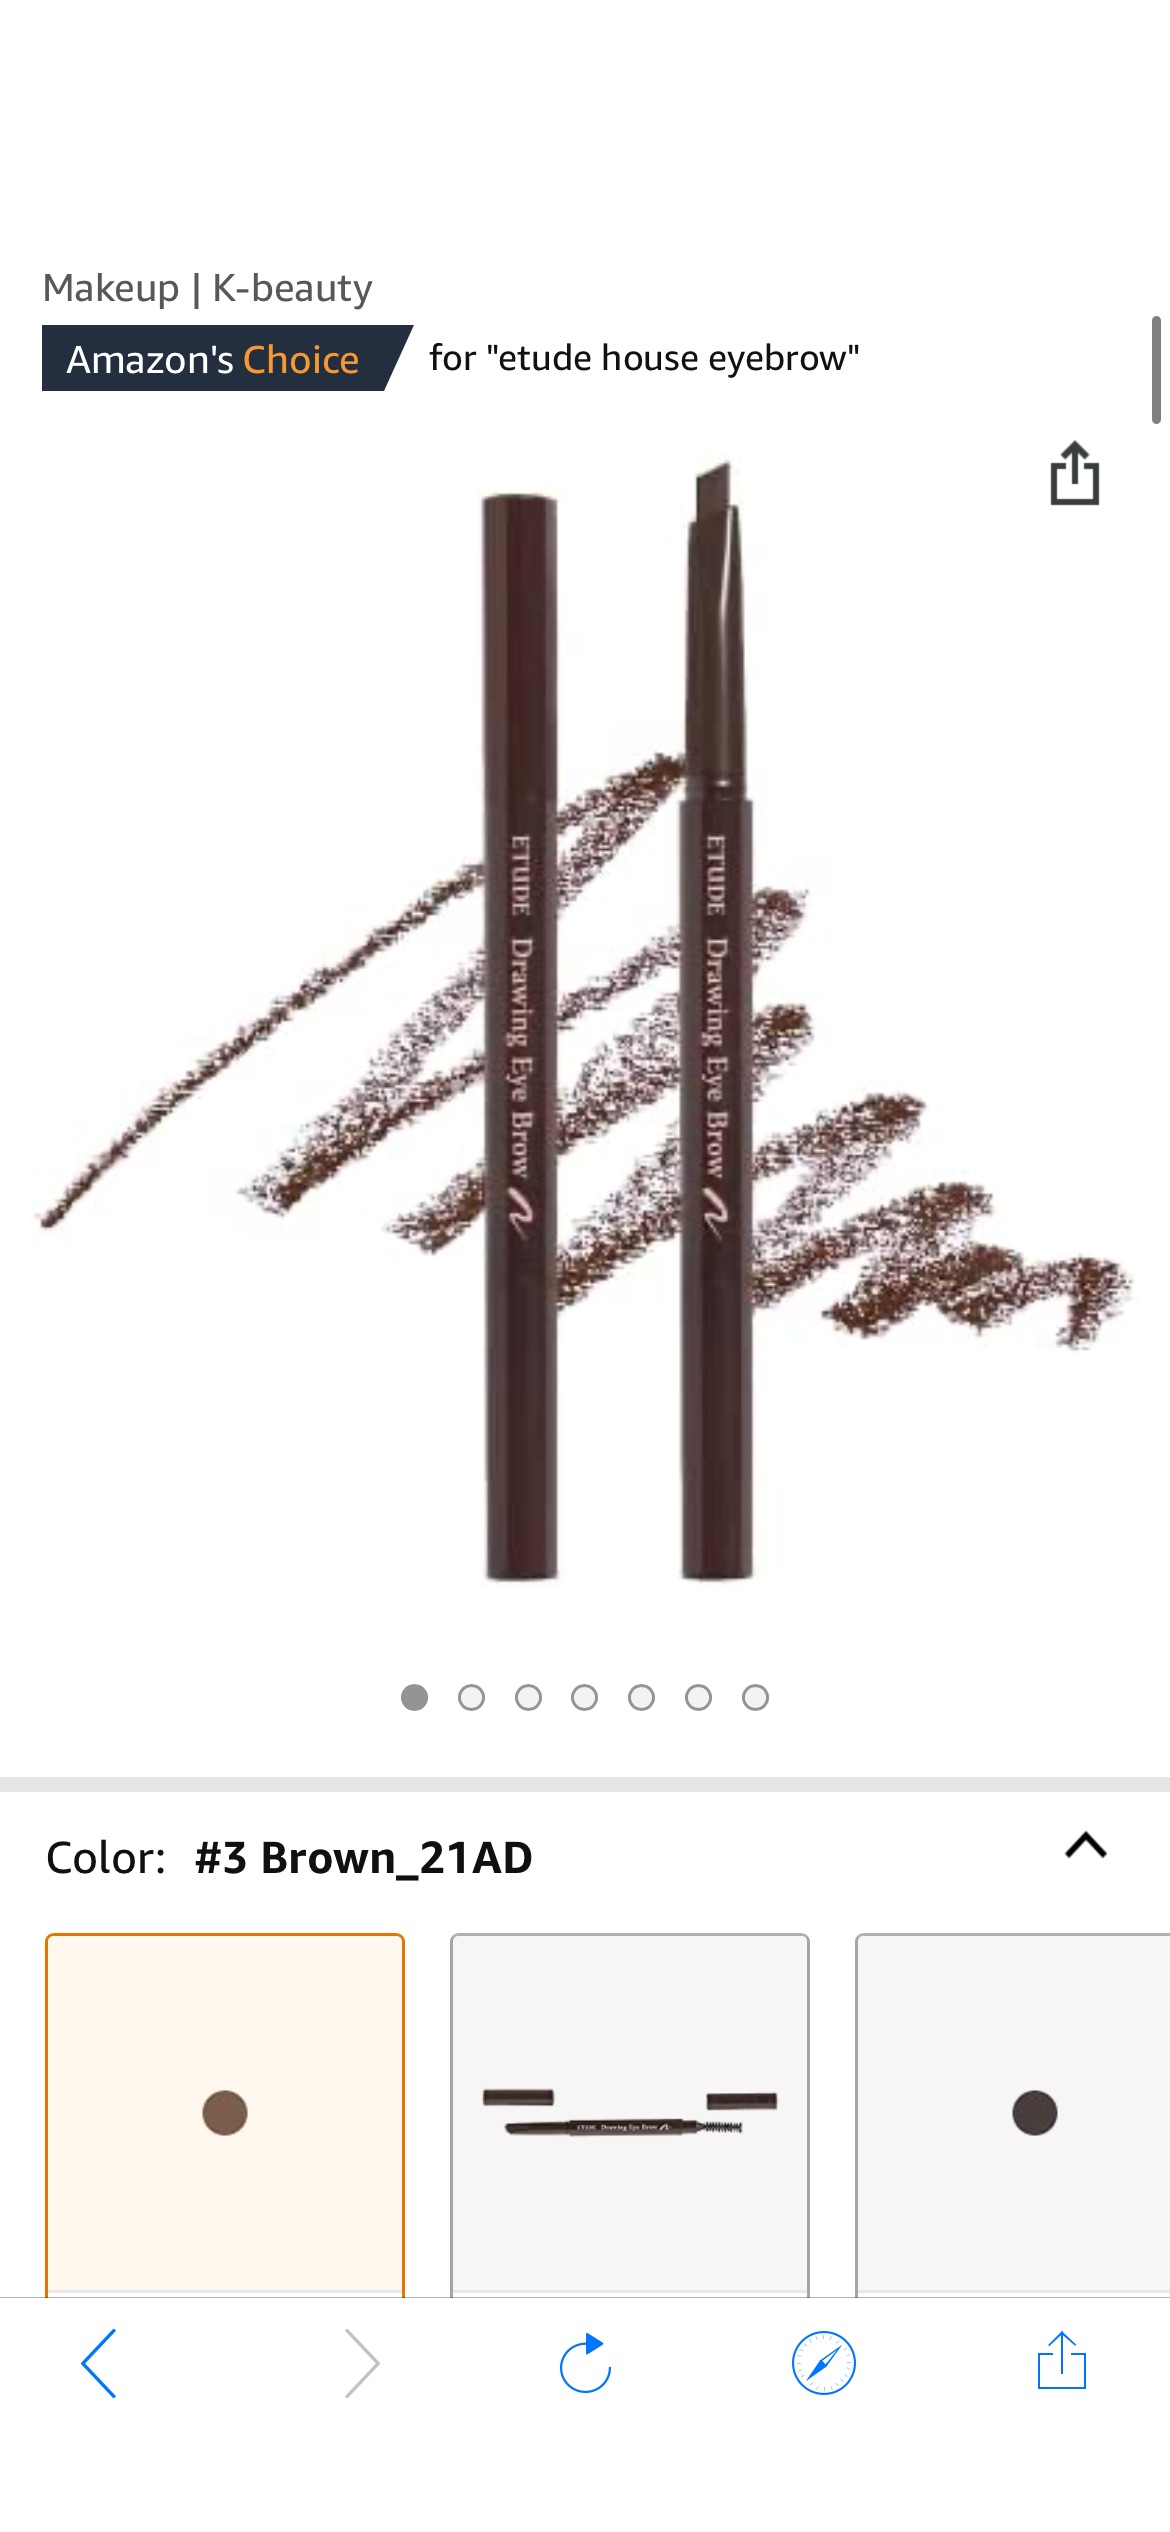 Amazon.com : ETUDE Drawing Eye Brow #3 Brown 21AD | Long Lasting Eyebrow Pencil for Soft Textured Natural Daily Look Eyebrow Makeup | K-beauty : Beauty & Personal Care